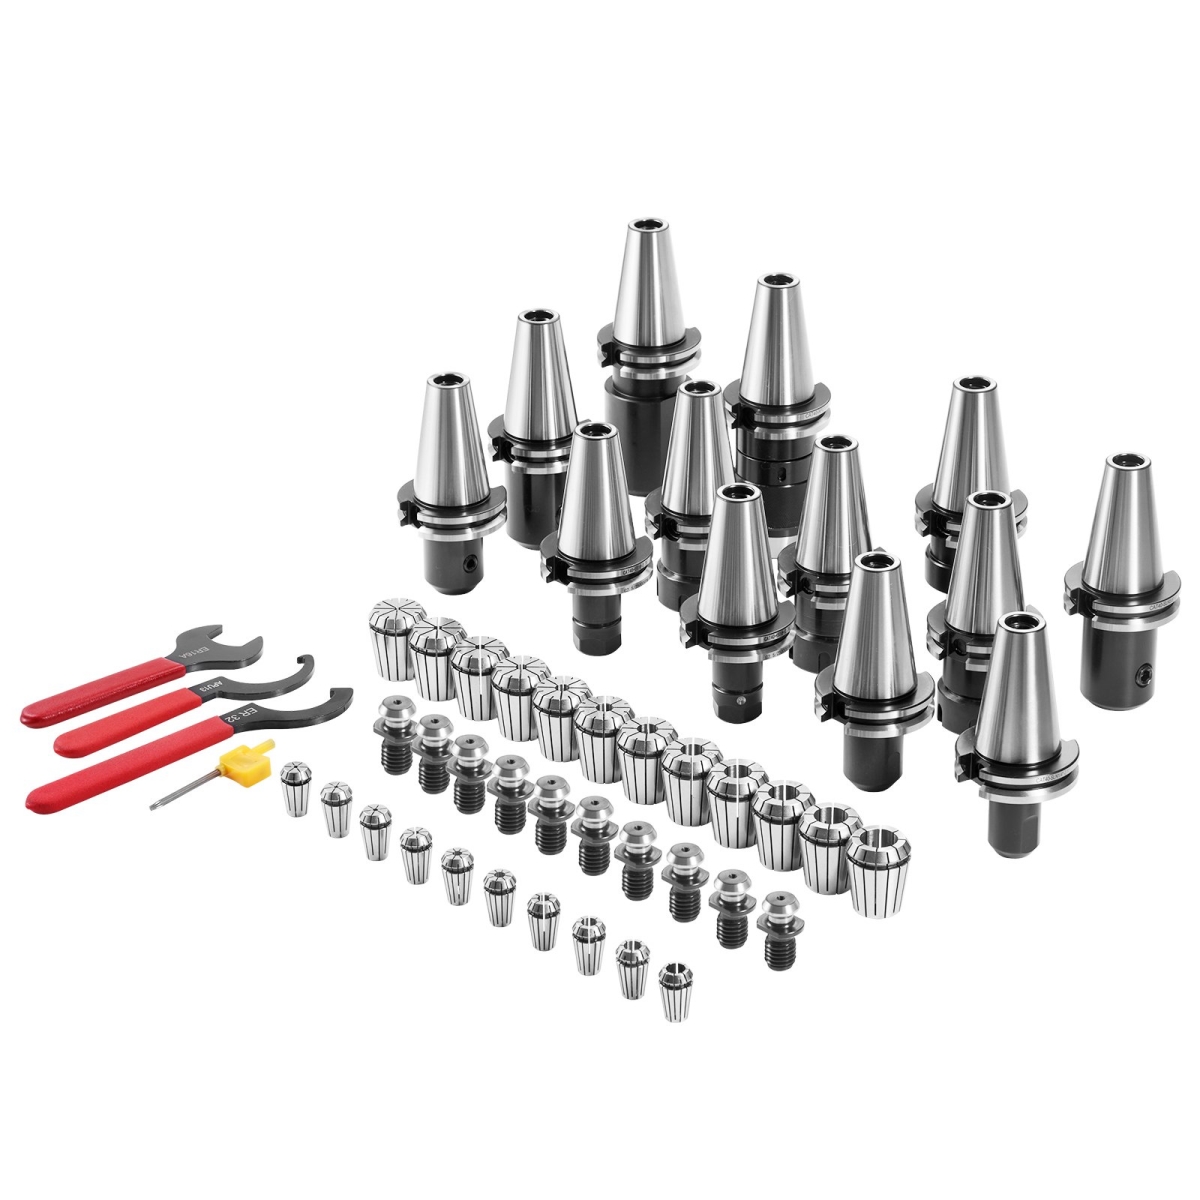 Picture of Vevor CATDBCAT40ERJEC38V0 Collet Holder ER 16-32 Collet Set&#44; Tool Holders Spring Steel Collet Chucks with 10 Pull Studs & 3 Wrenches for Milling Machine Drill Presses Boring Machine - 35 Piece